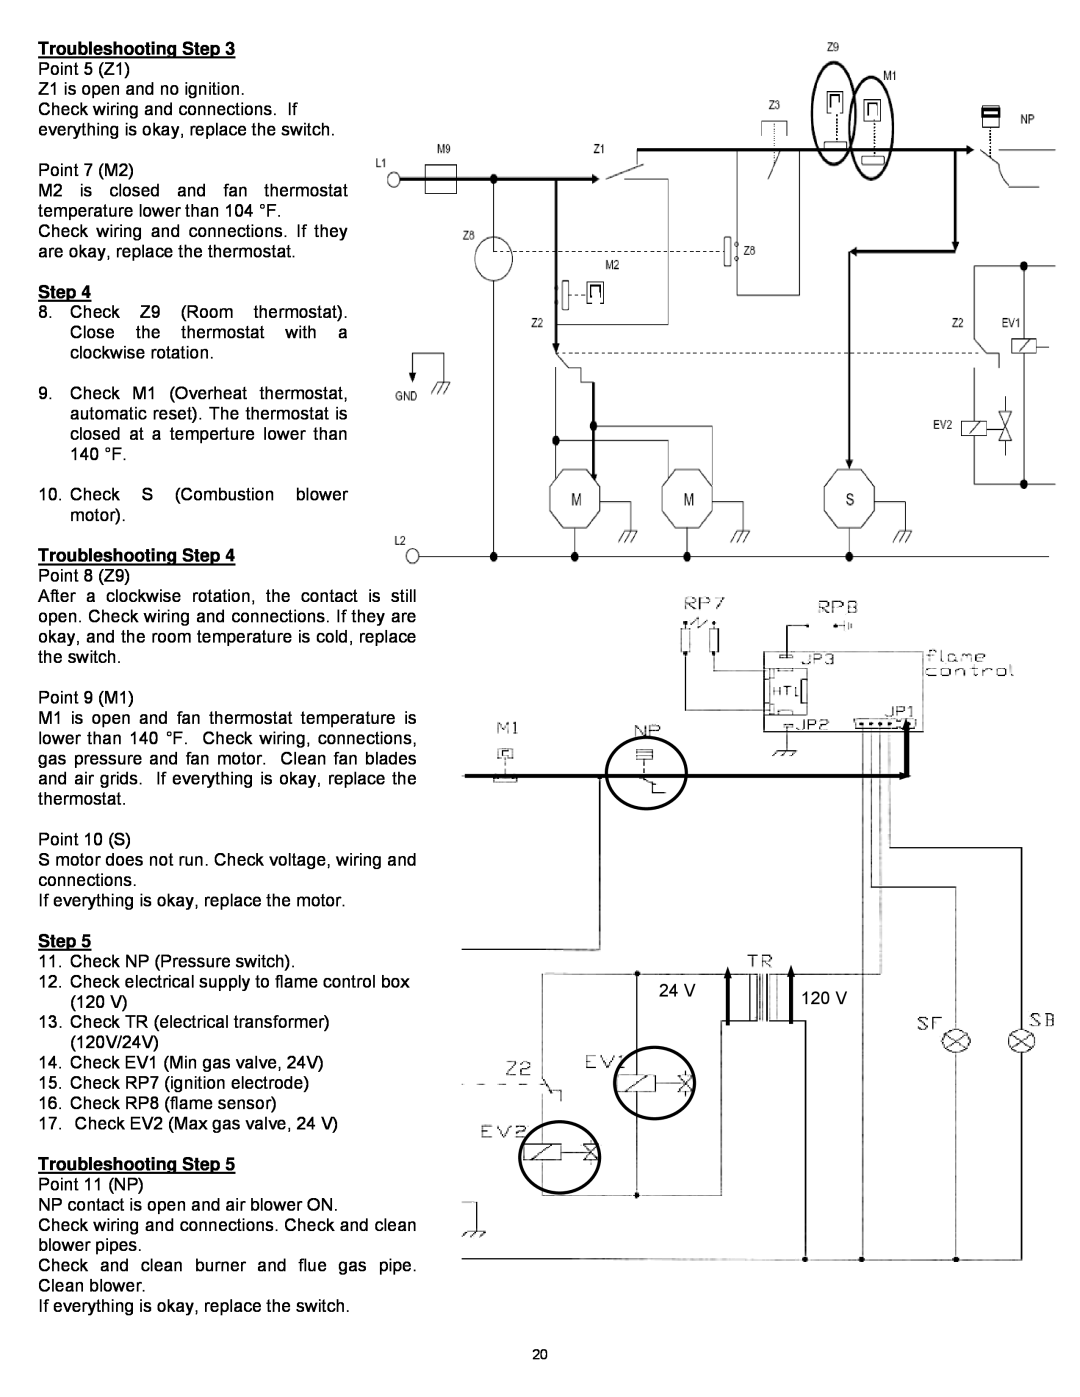 Williams 2903512, 2903511 installation instructions Troubleshooting Step 